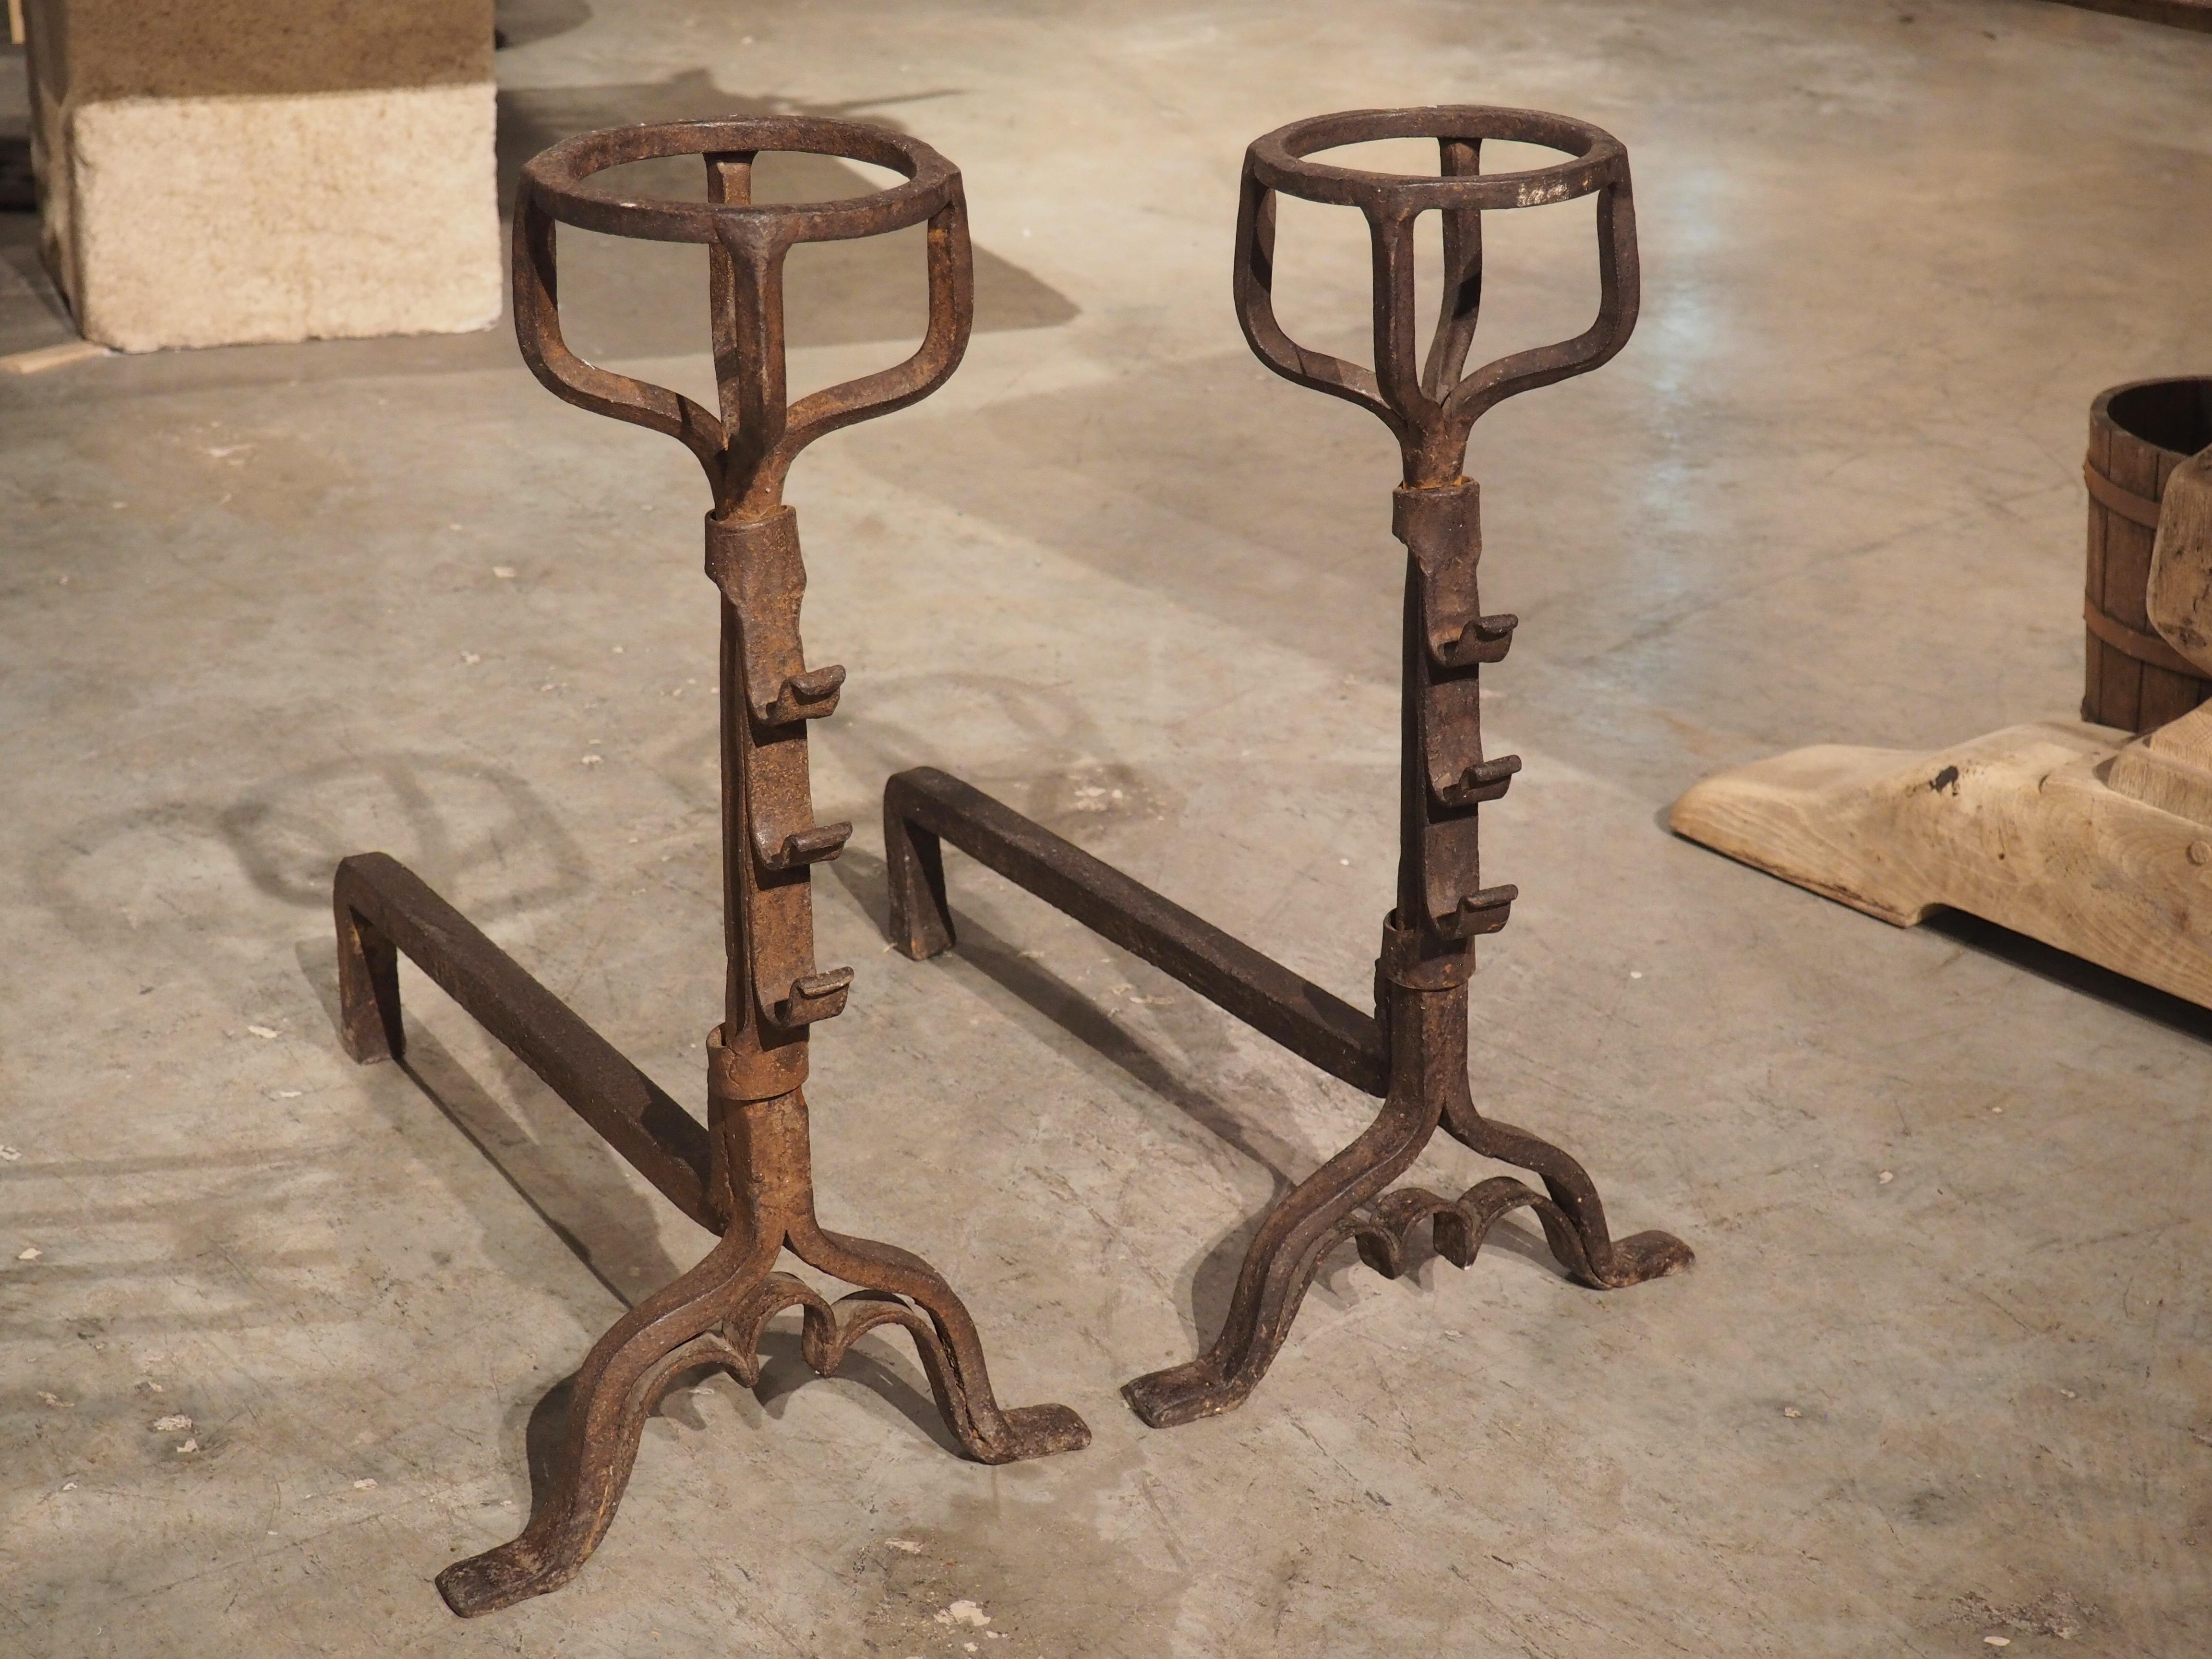 These antique French “chenets” are from the 1700s and have been hand-wrought in iron. Their uppermost portions were crafted to hold cups or bowls of liquid which would then be heated from the fire behind. The hooks attached to the front of the